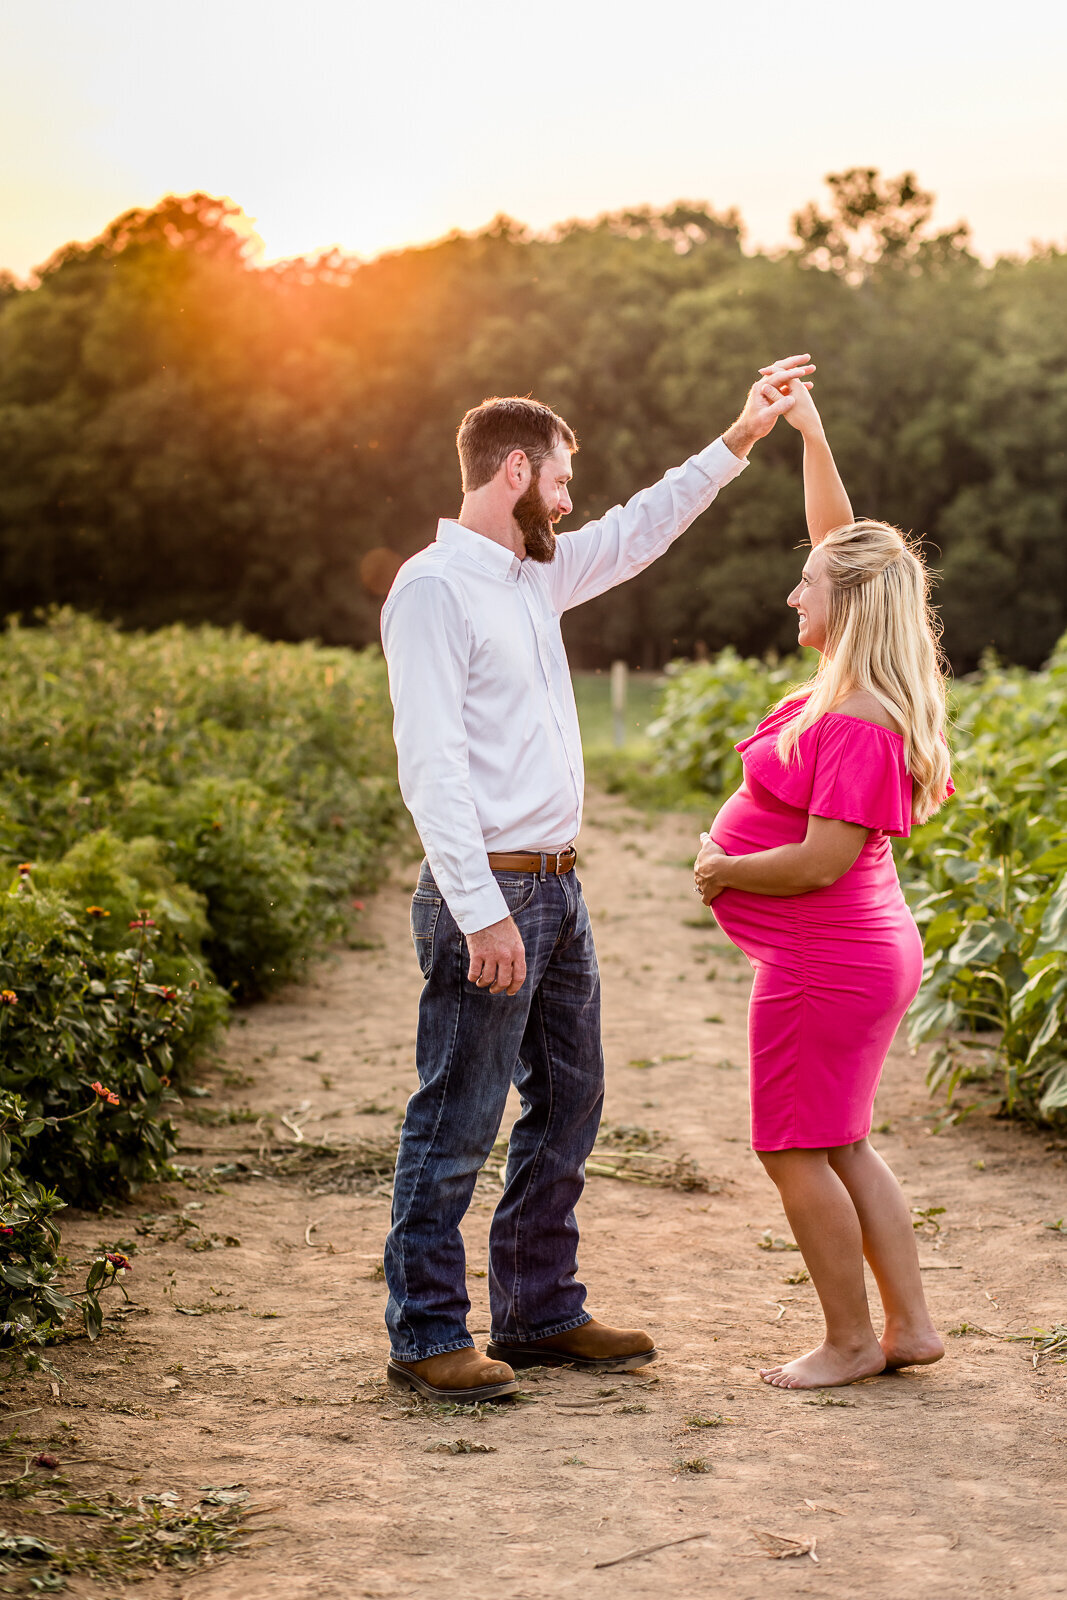 Outdoor_maternity_lifestyle_photography_session_Georgetown_KY_photographer-5